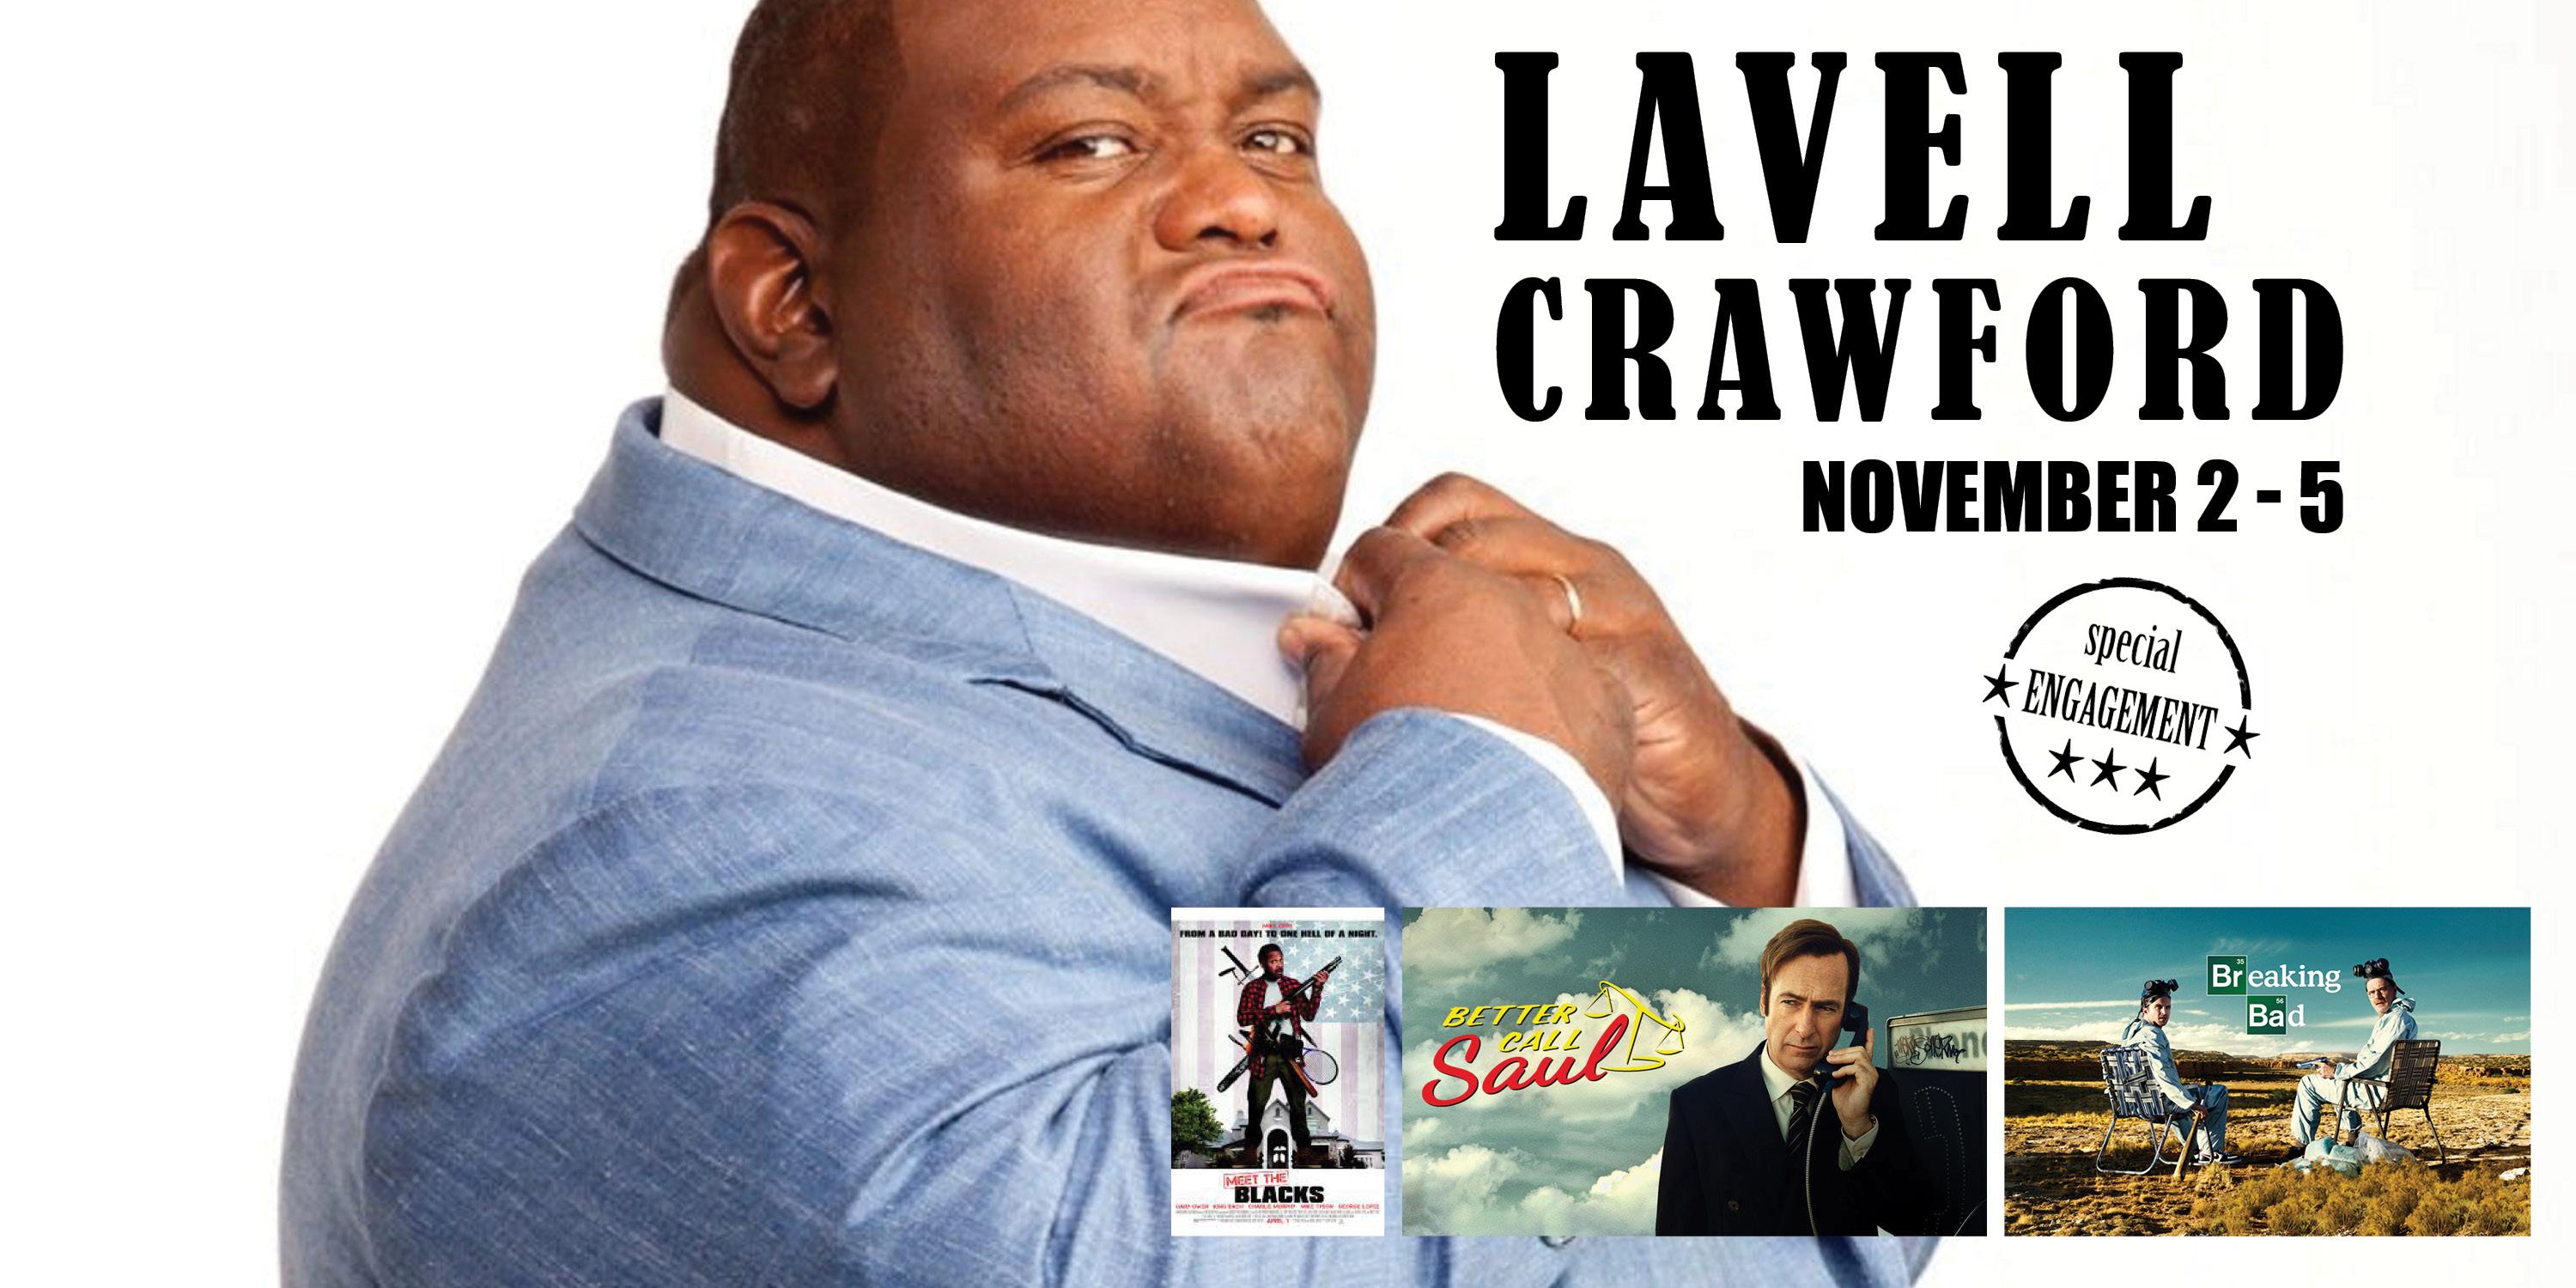 Comedian Lavell Crawford live at Off the hook comedy club Naples, Florida